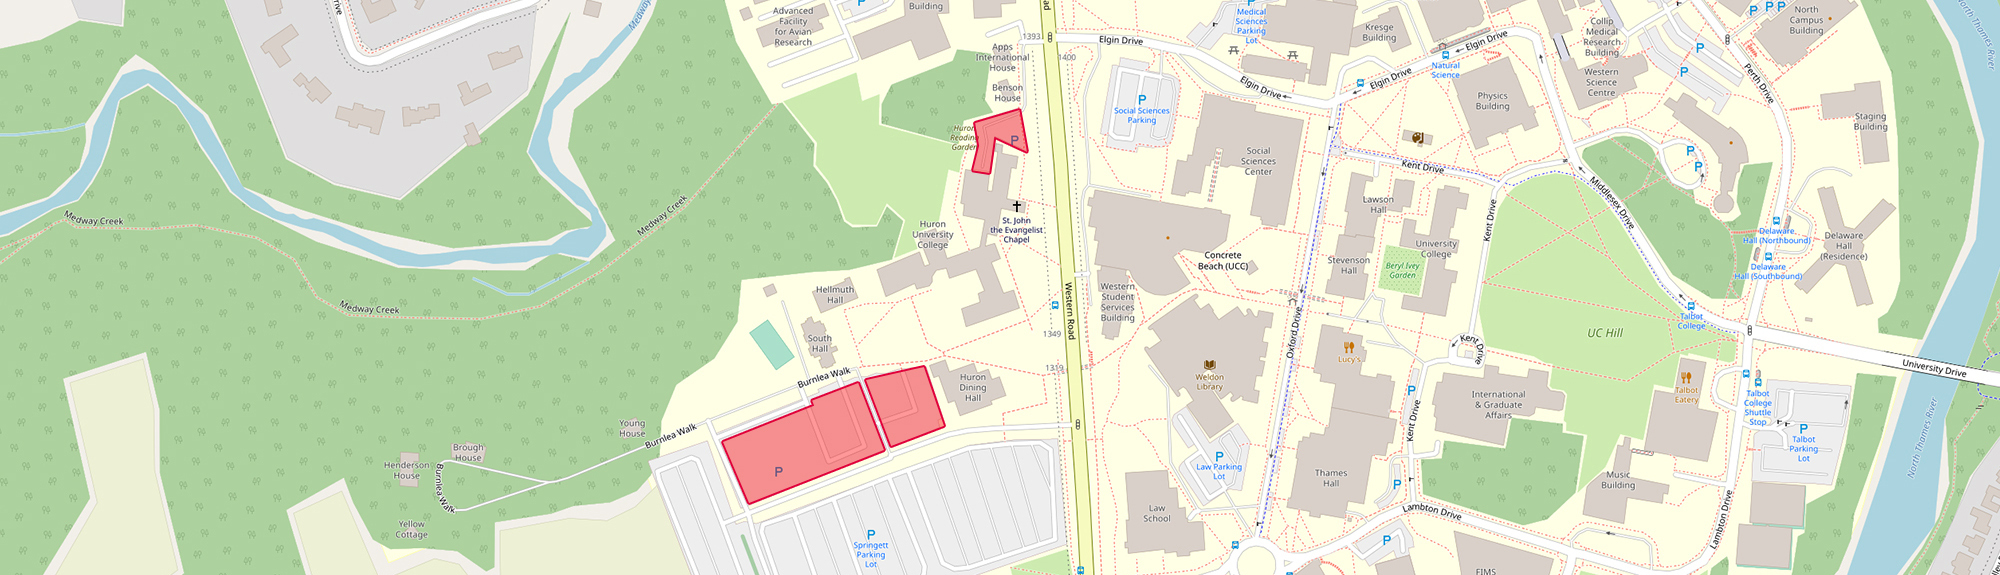 Convocation parking map